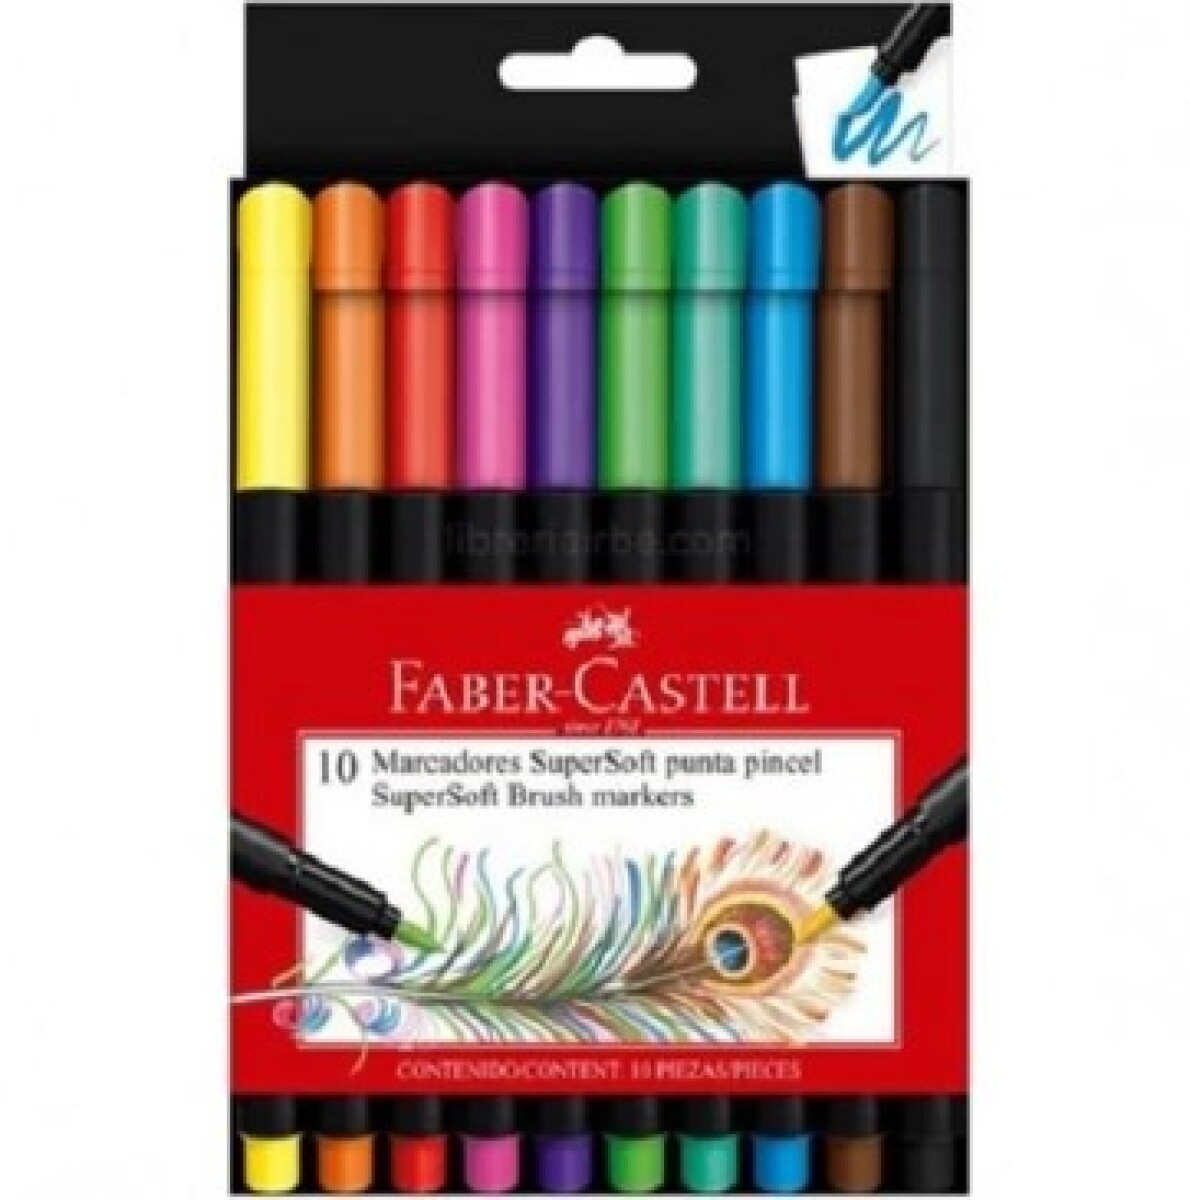 Marcador faber castell supersoft brush x10 